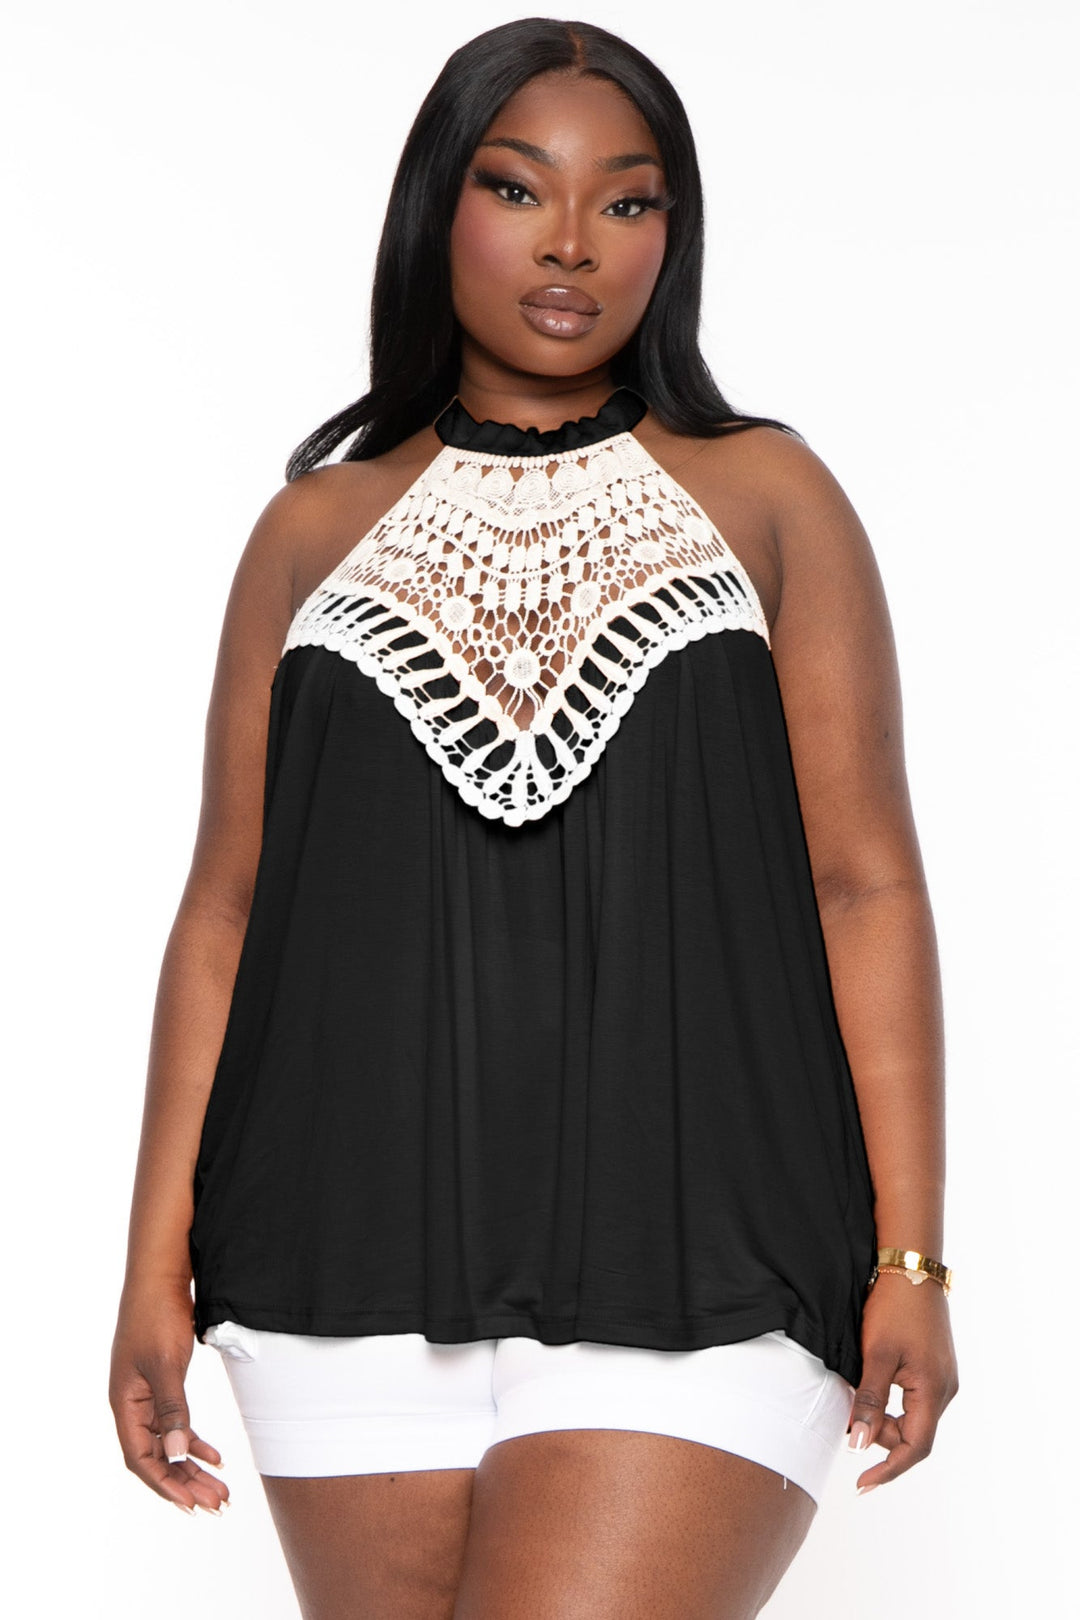 CULTURE CODE Tops 1X / Black Plus Size Embroidery Halter Tank Top - Black